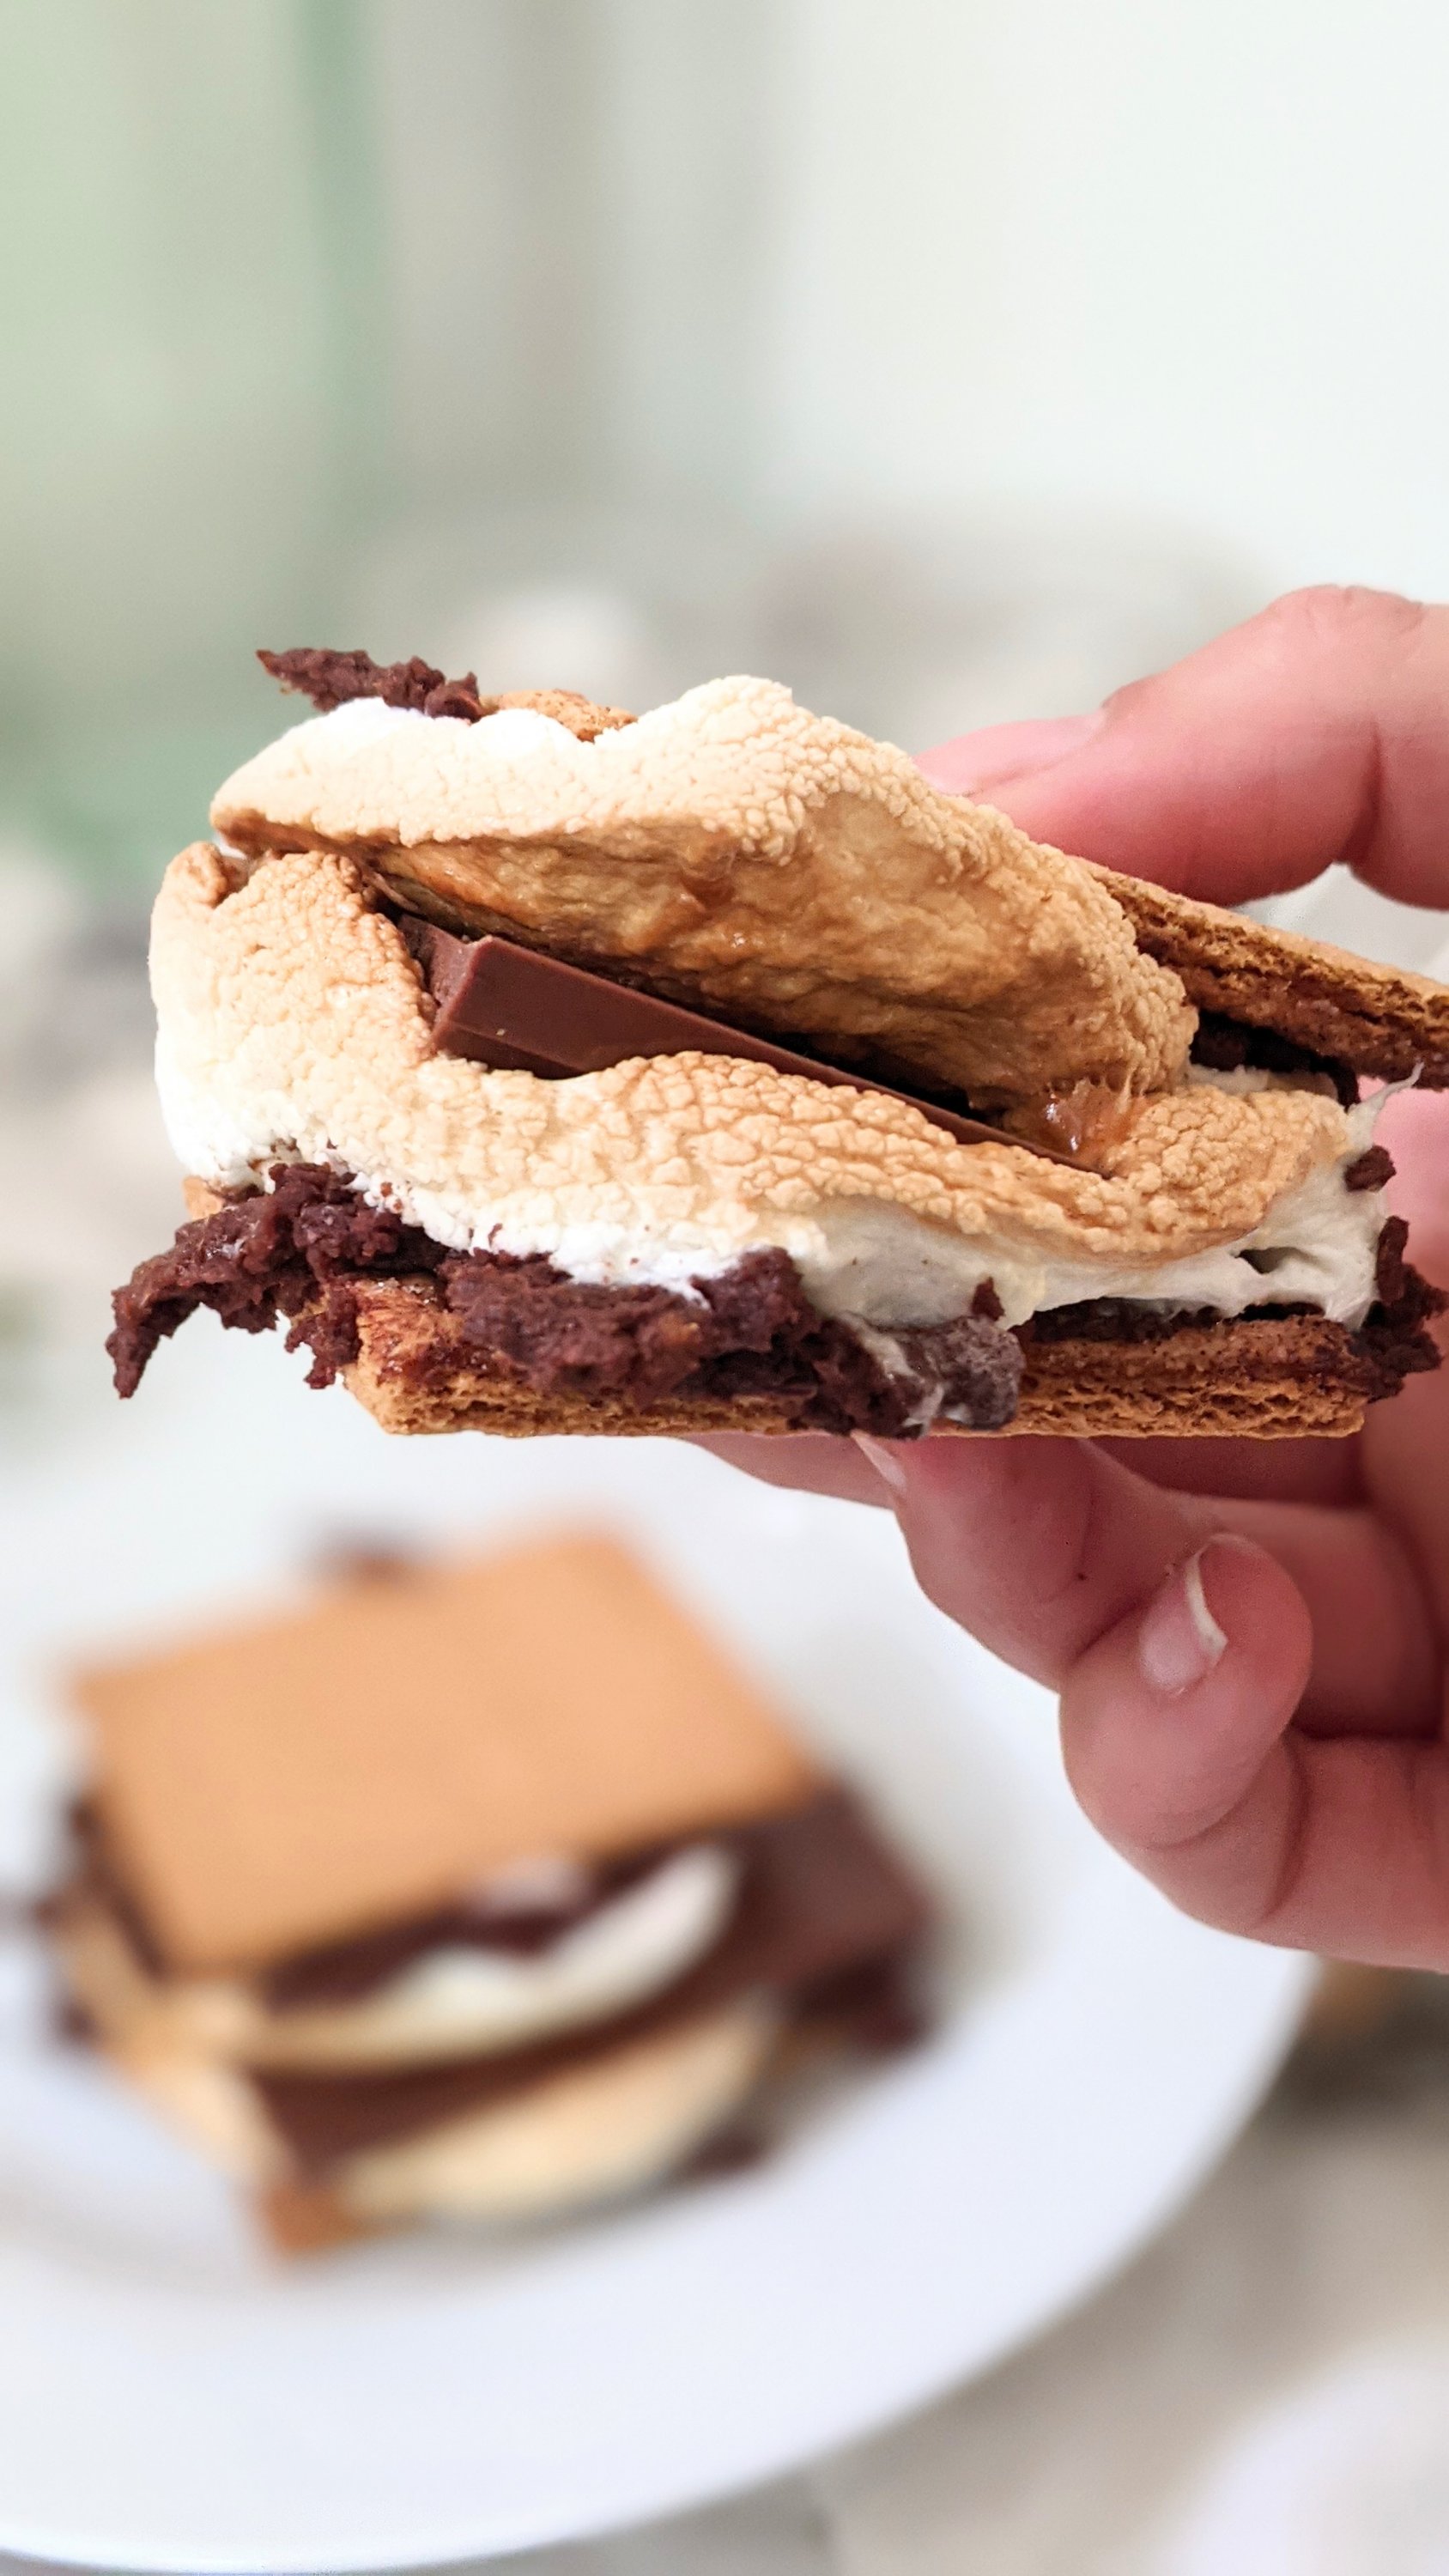 air fried s'mores recipe brownie s'mores recipe chocolate smores in the air fryer easy recipes 5 minute air fryer desserts for kids indoor smores recipes for summer desserts